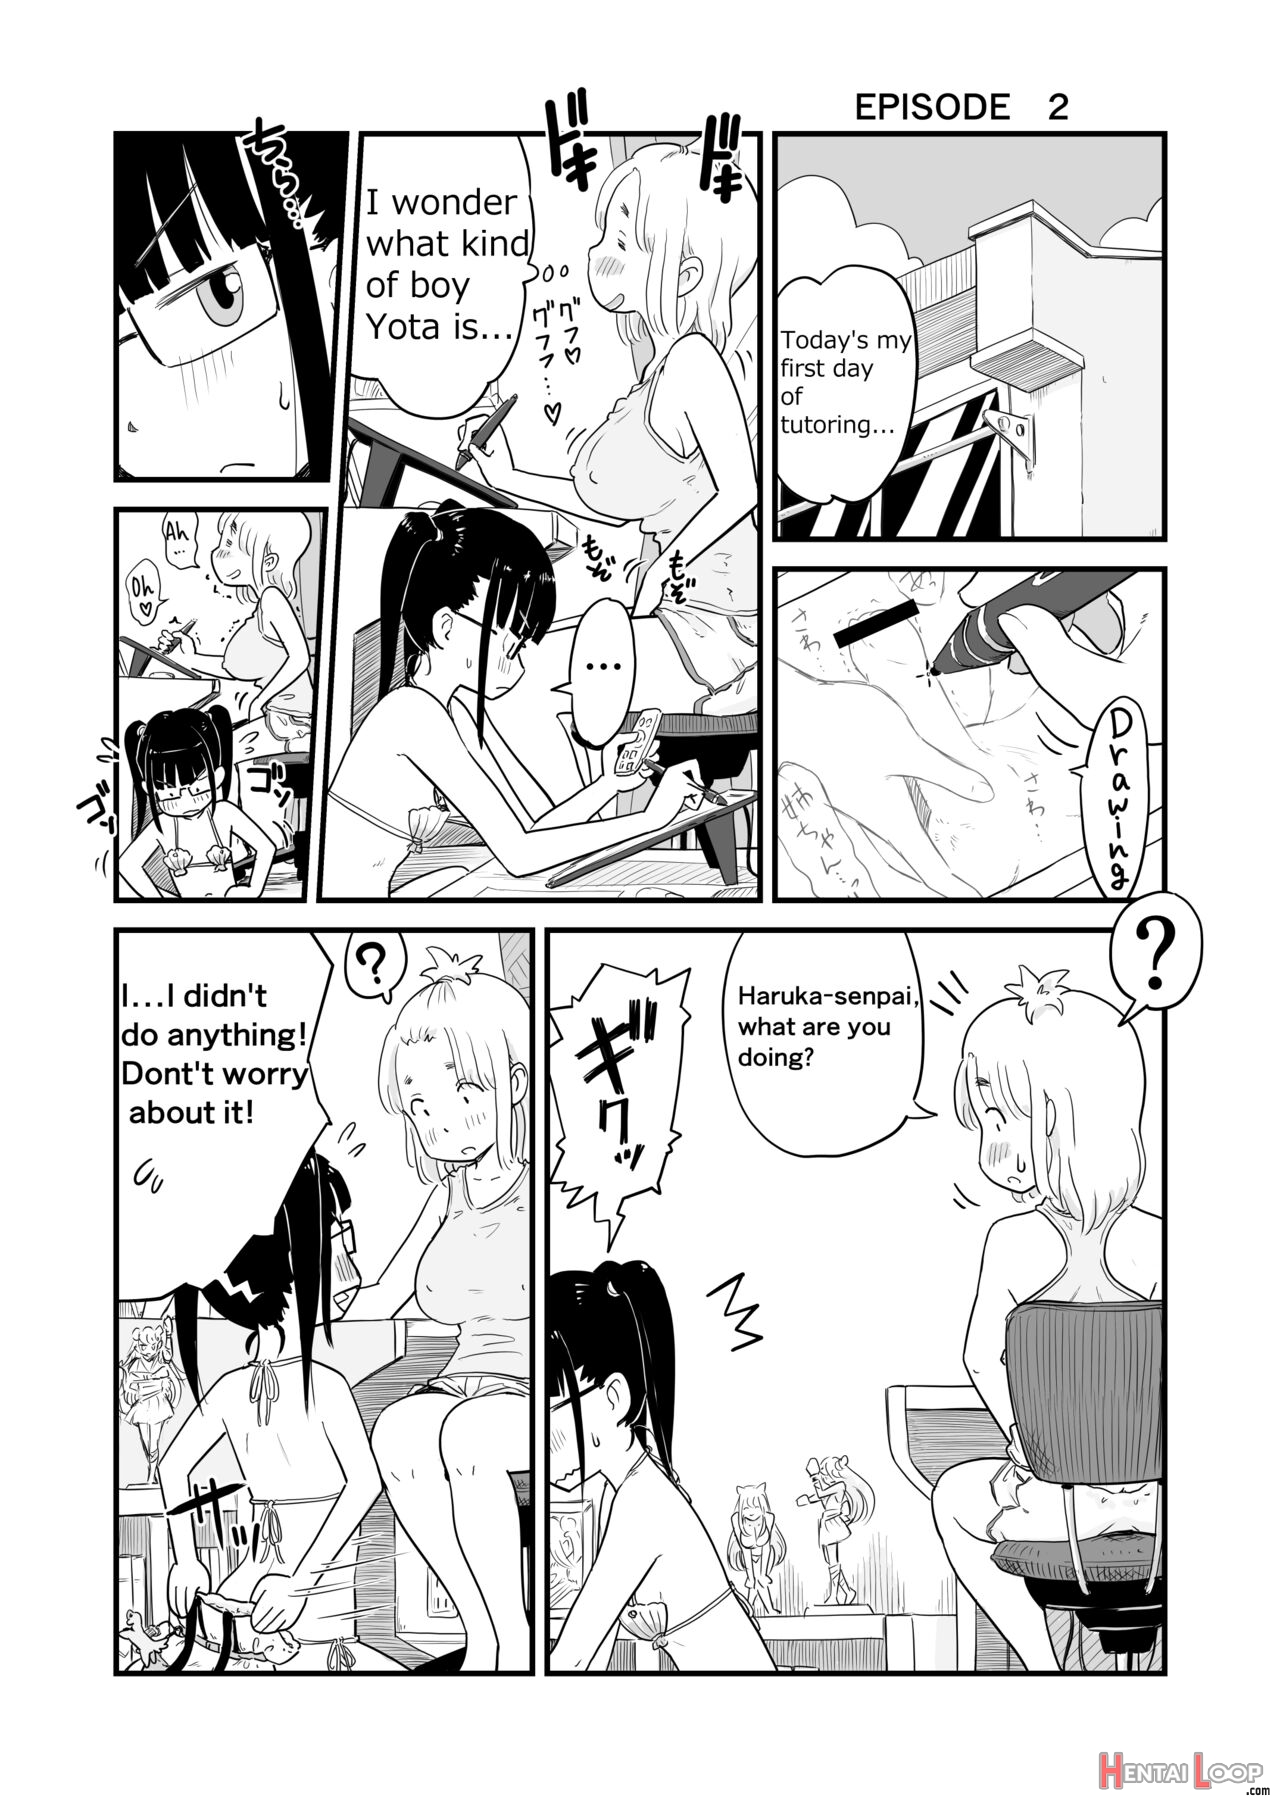 My Sister Is A Doujinshi Artist Of One-shota. page 15